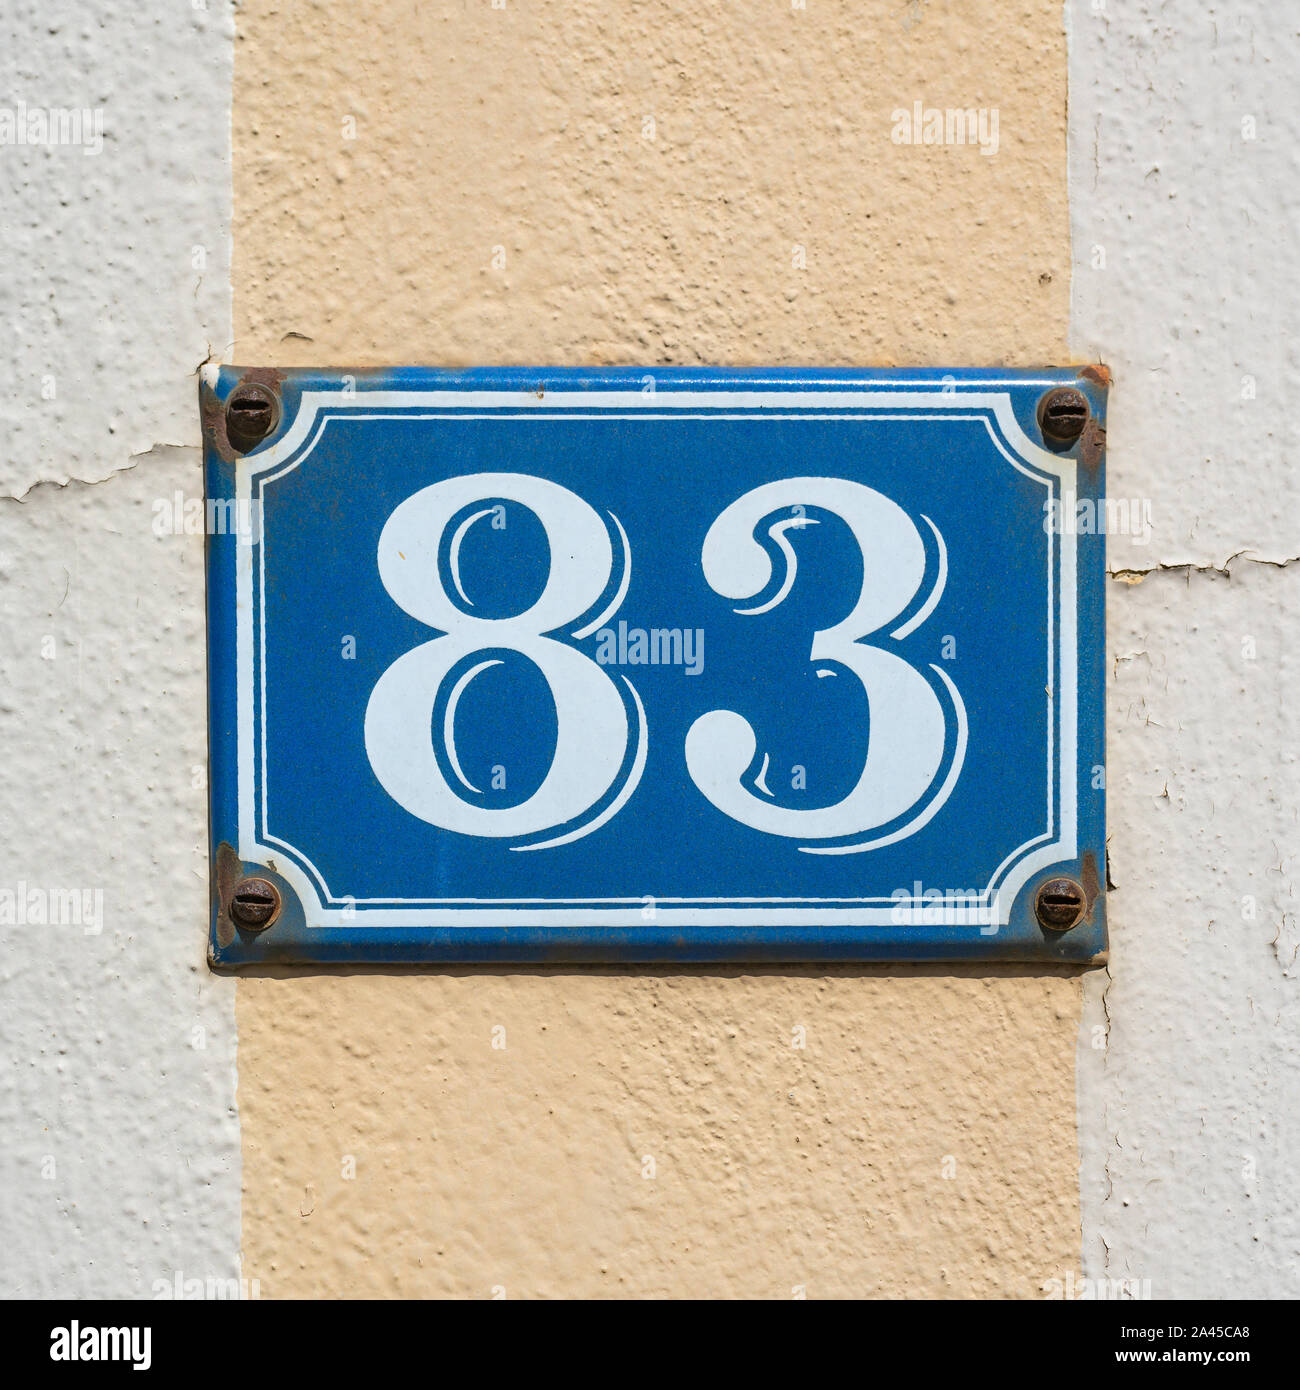 enameled house number eighty three on a wall with a peach colored stripe Stock Photo